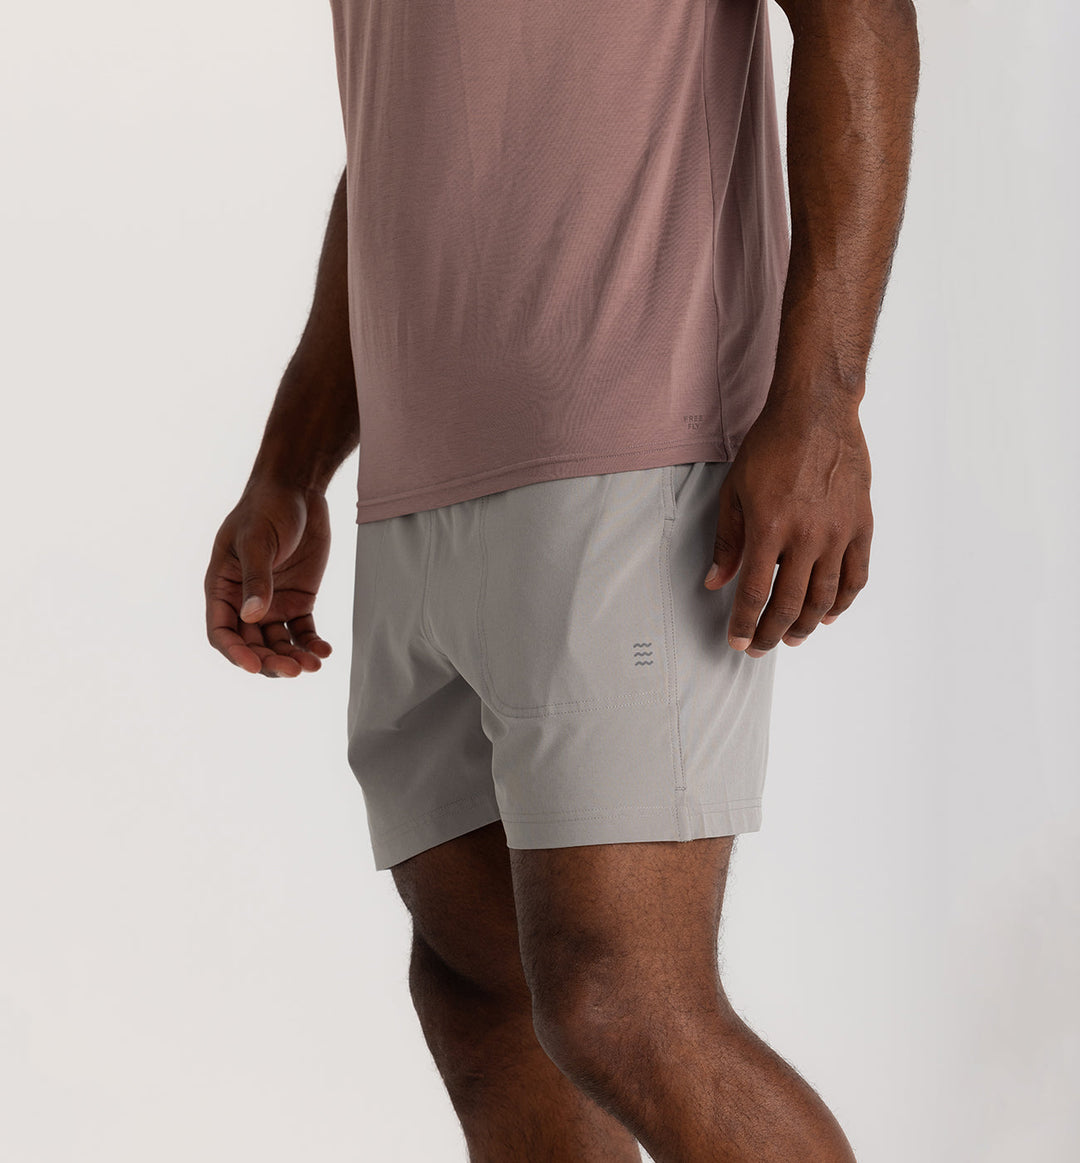 Free Fly Men's Bamboo-Lined Active Breeze Short – 5.5" - CEMENT - Sun Diego Boardshop